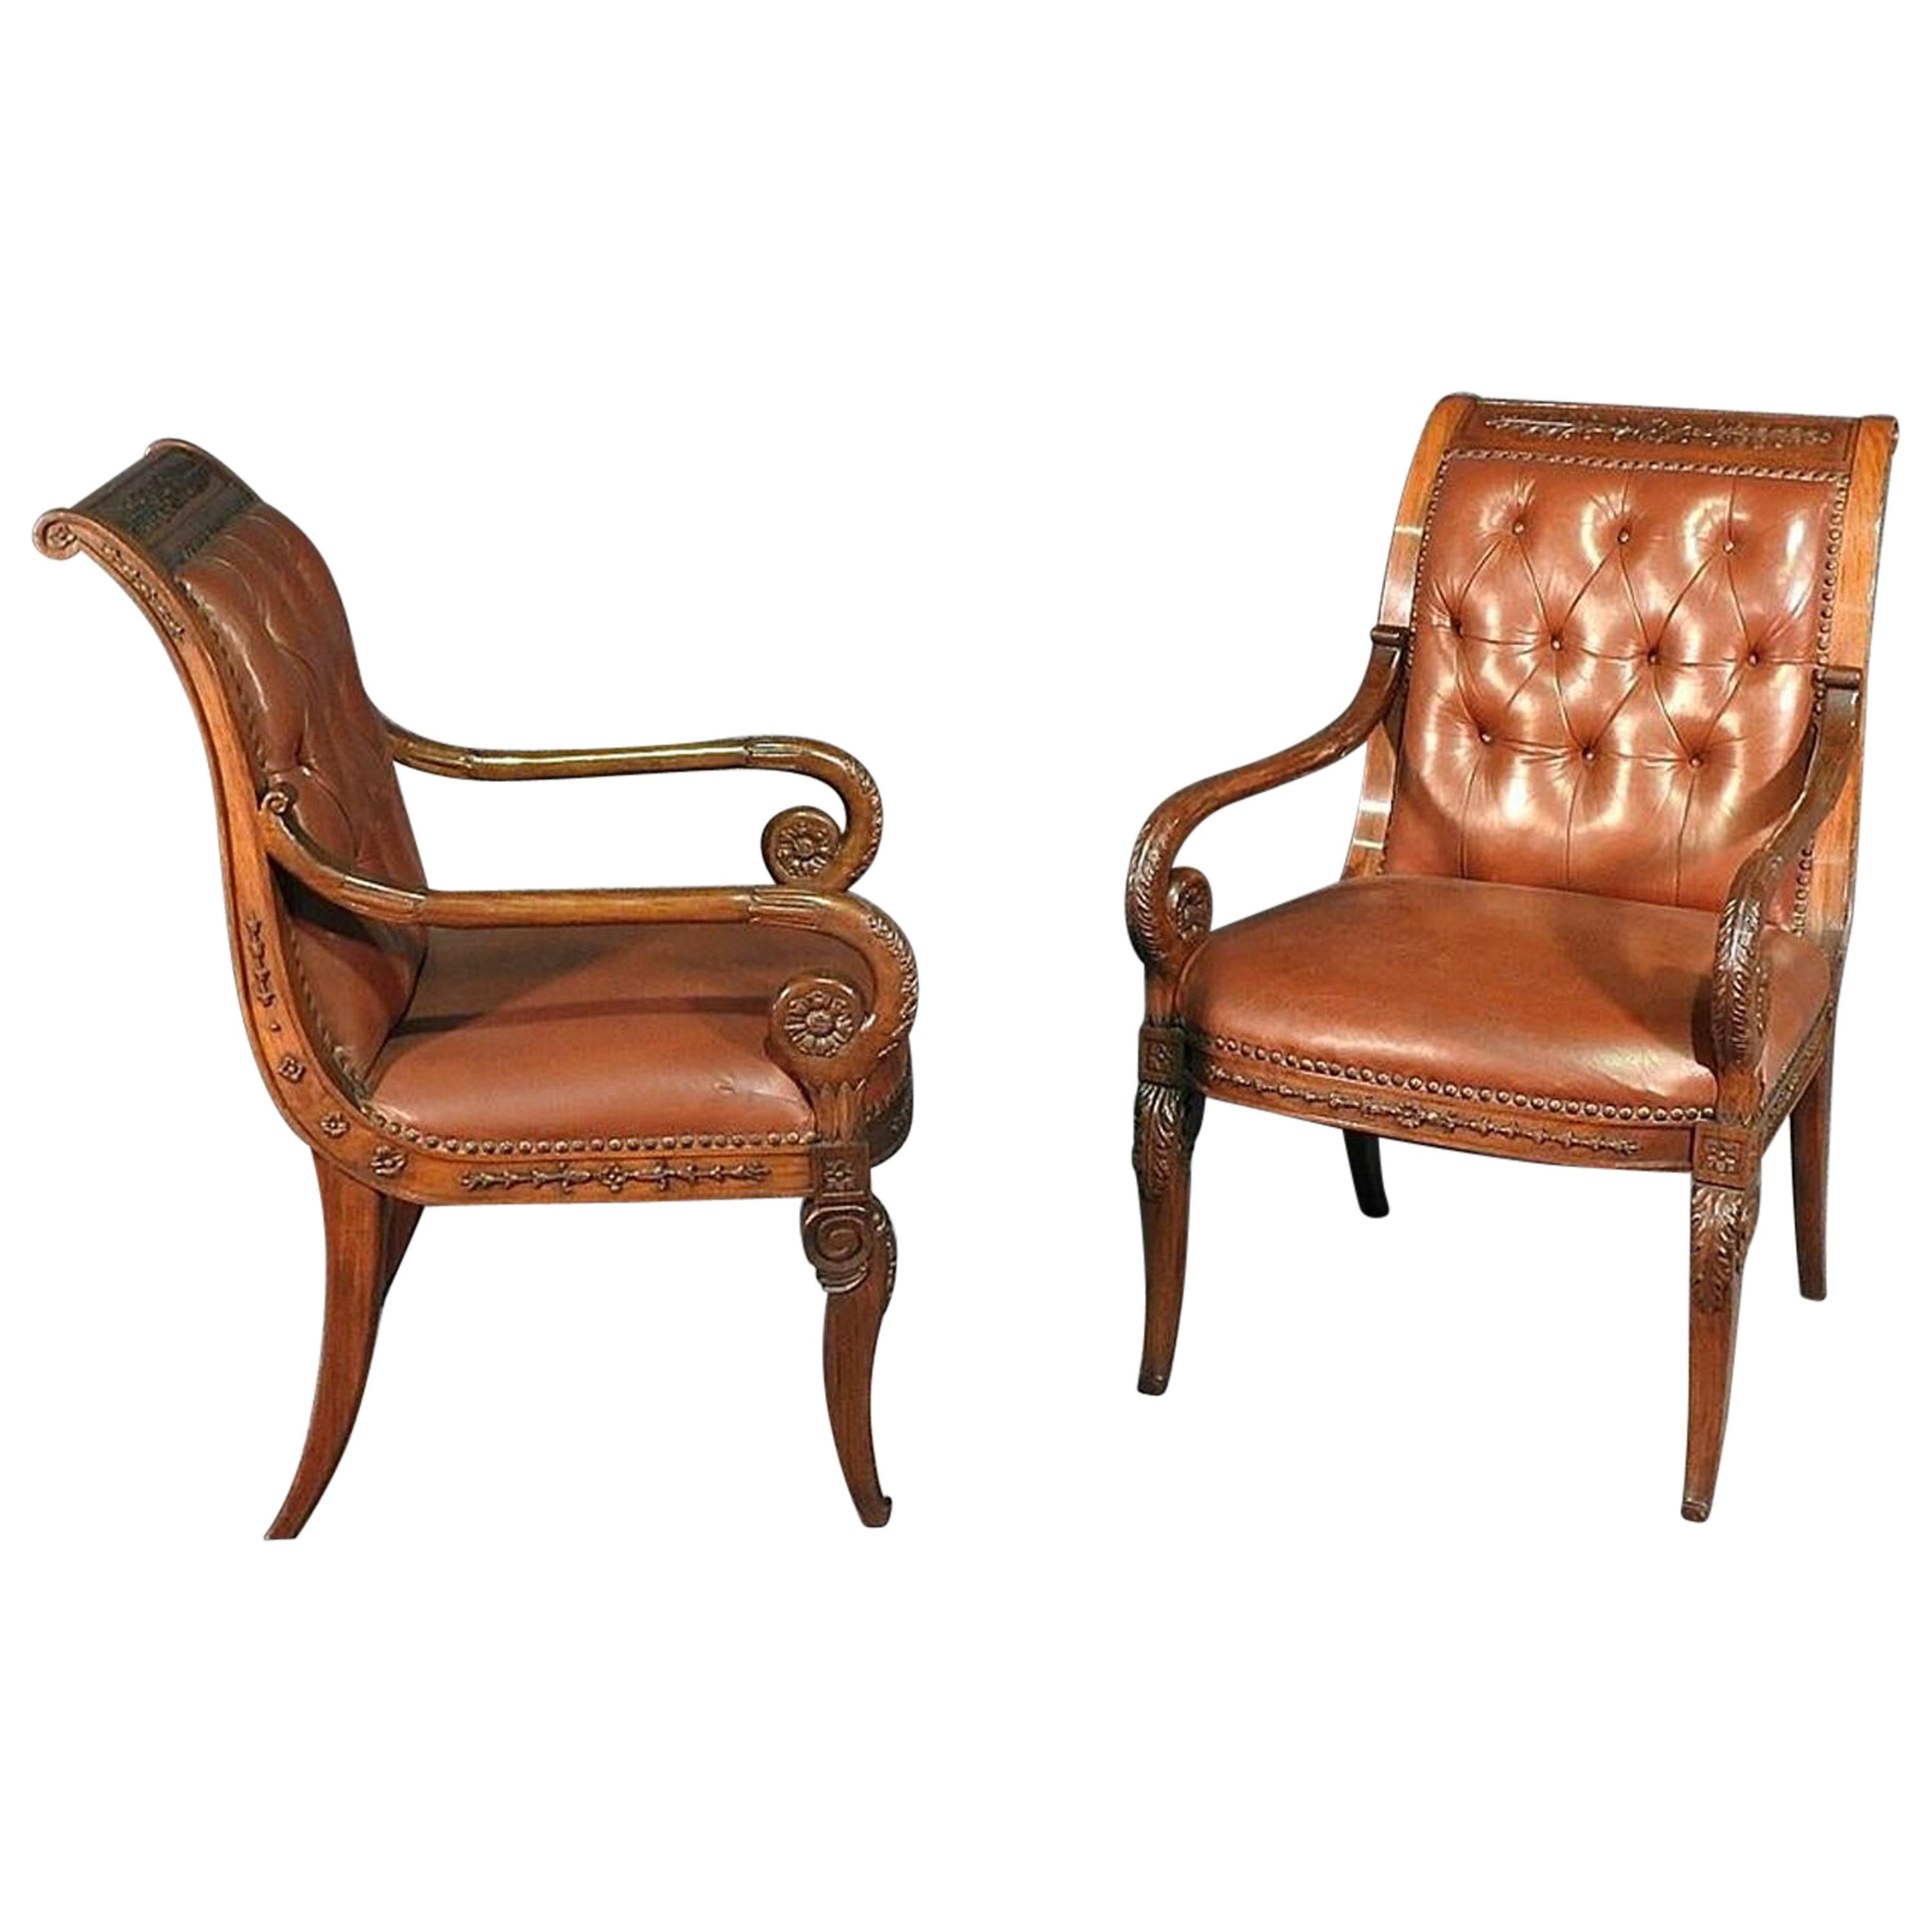 Pair of Tufted Carved Mahogany French Regency Style Leather Armchairs